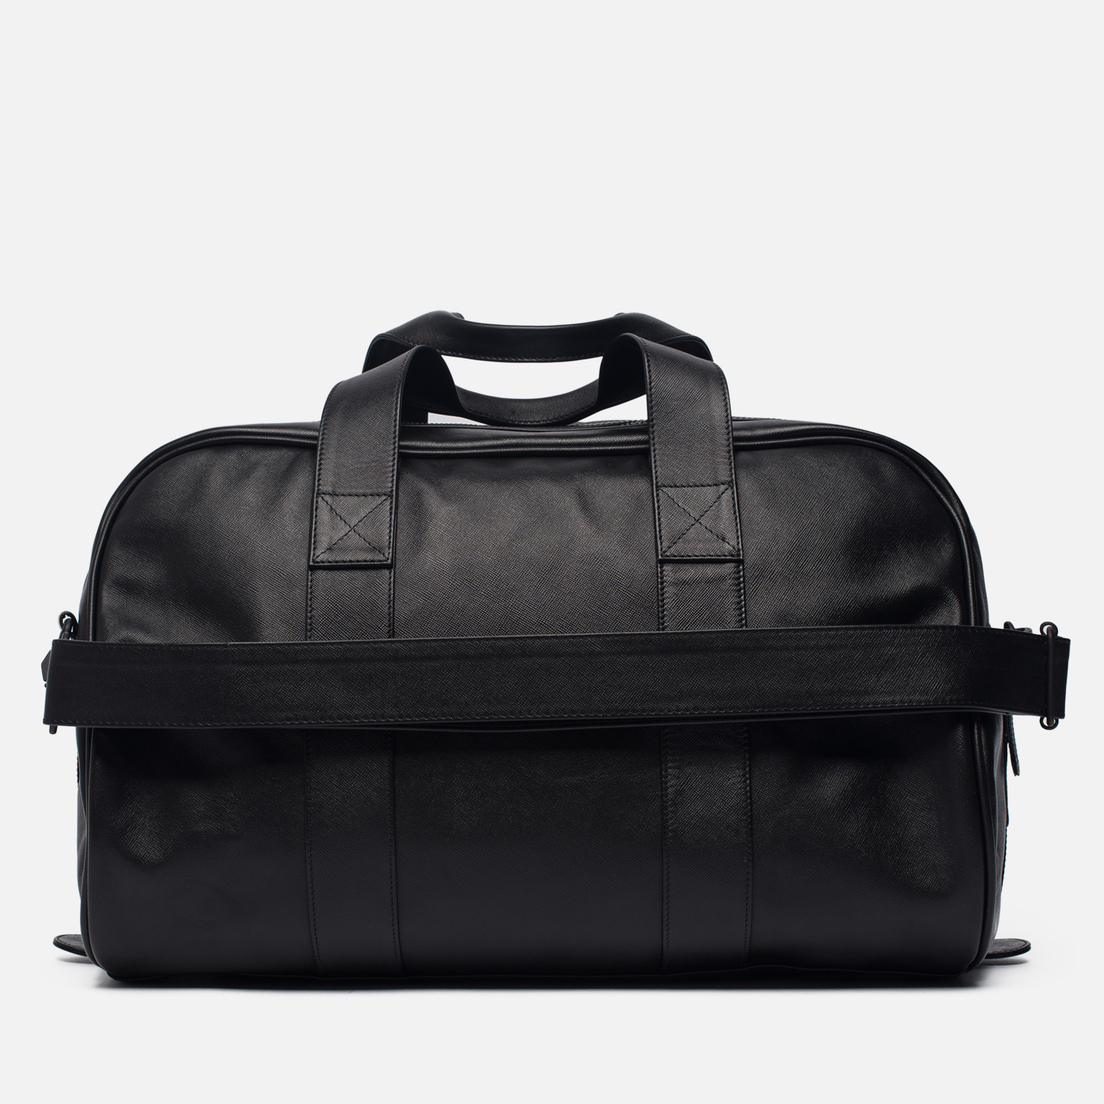 Common Projects Сумка Leather Duffle 8094